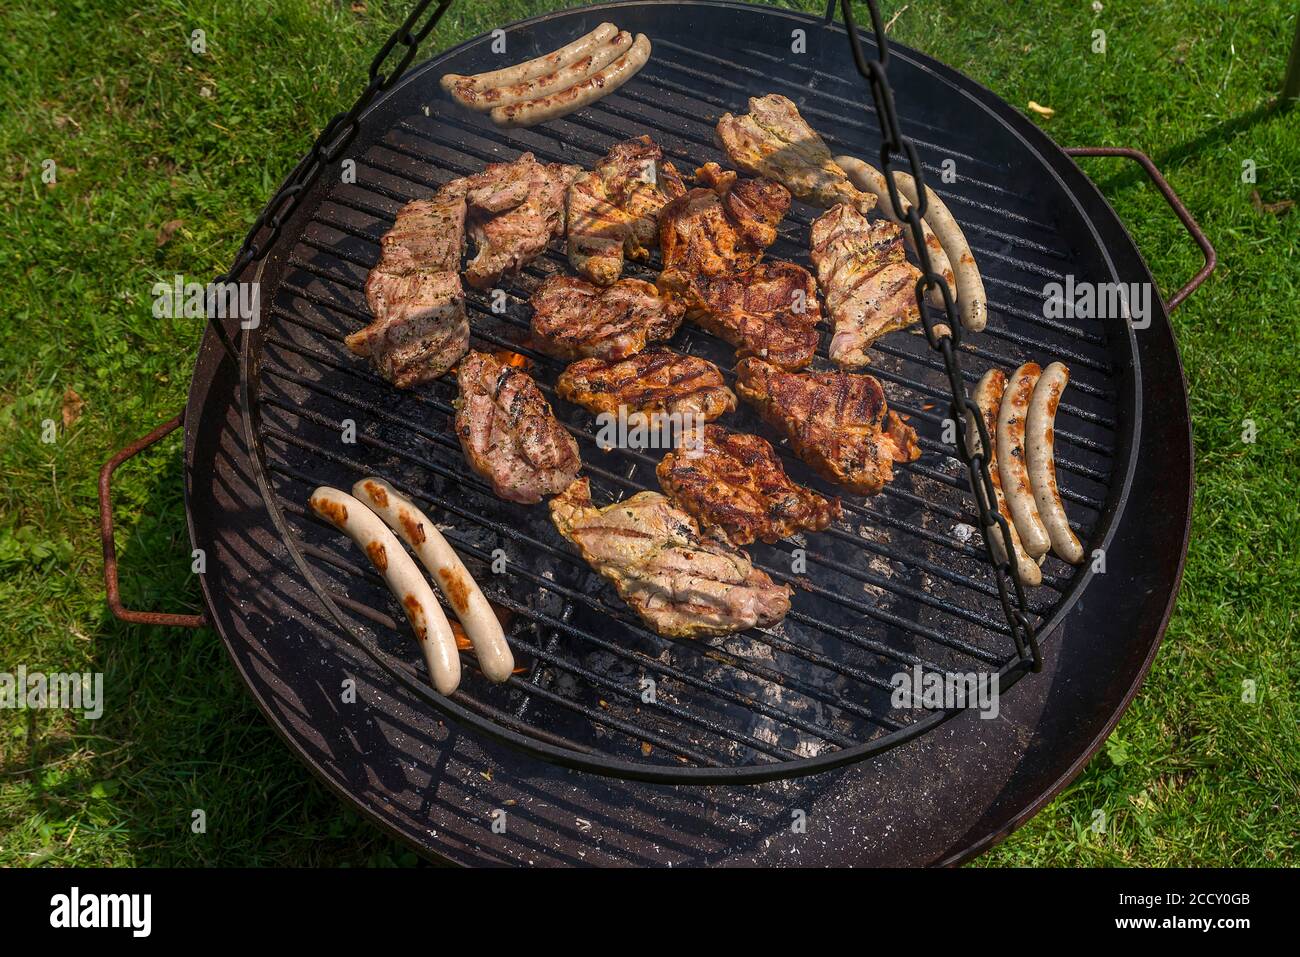 Finished barbecue on a swivel grill, Mecklenburg-Western Pomerania, Germany Stock Photo